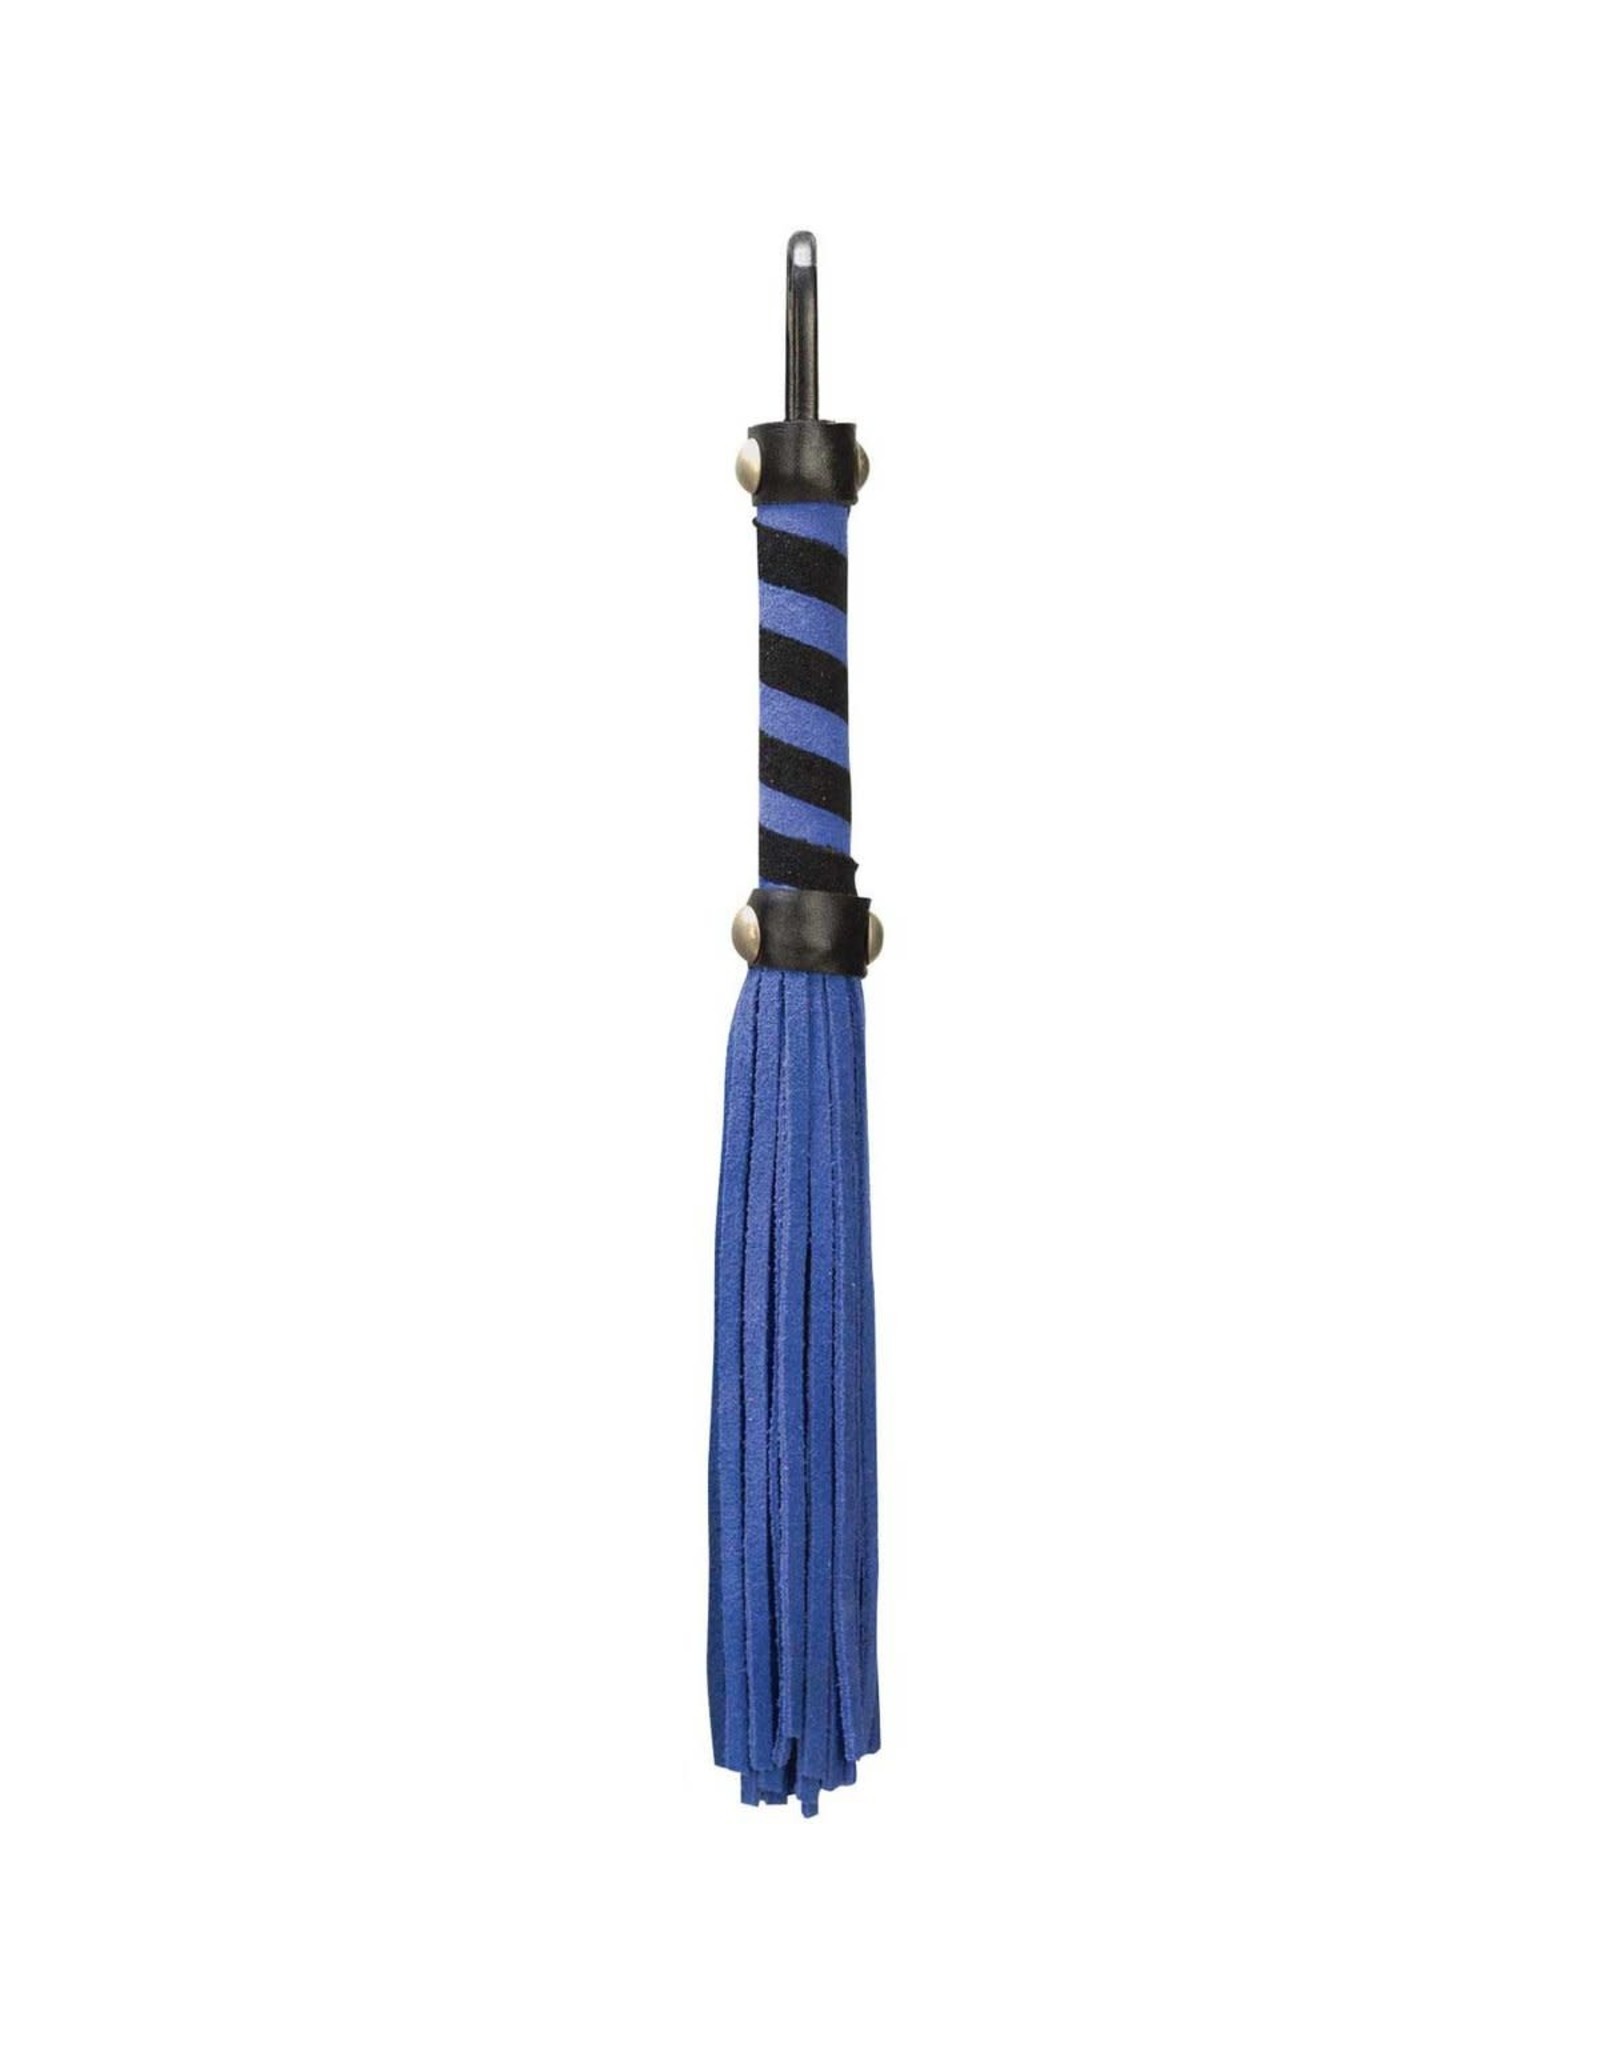 Punishment - Small Whip - Blue